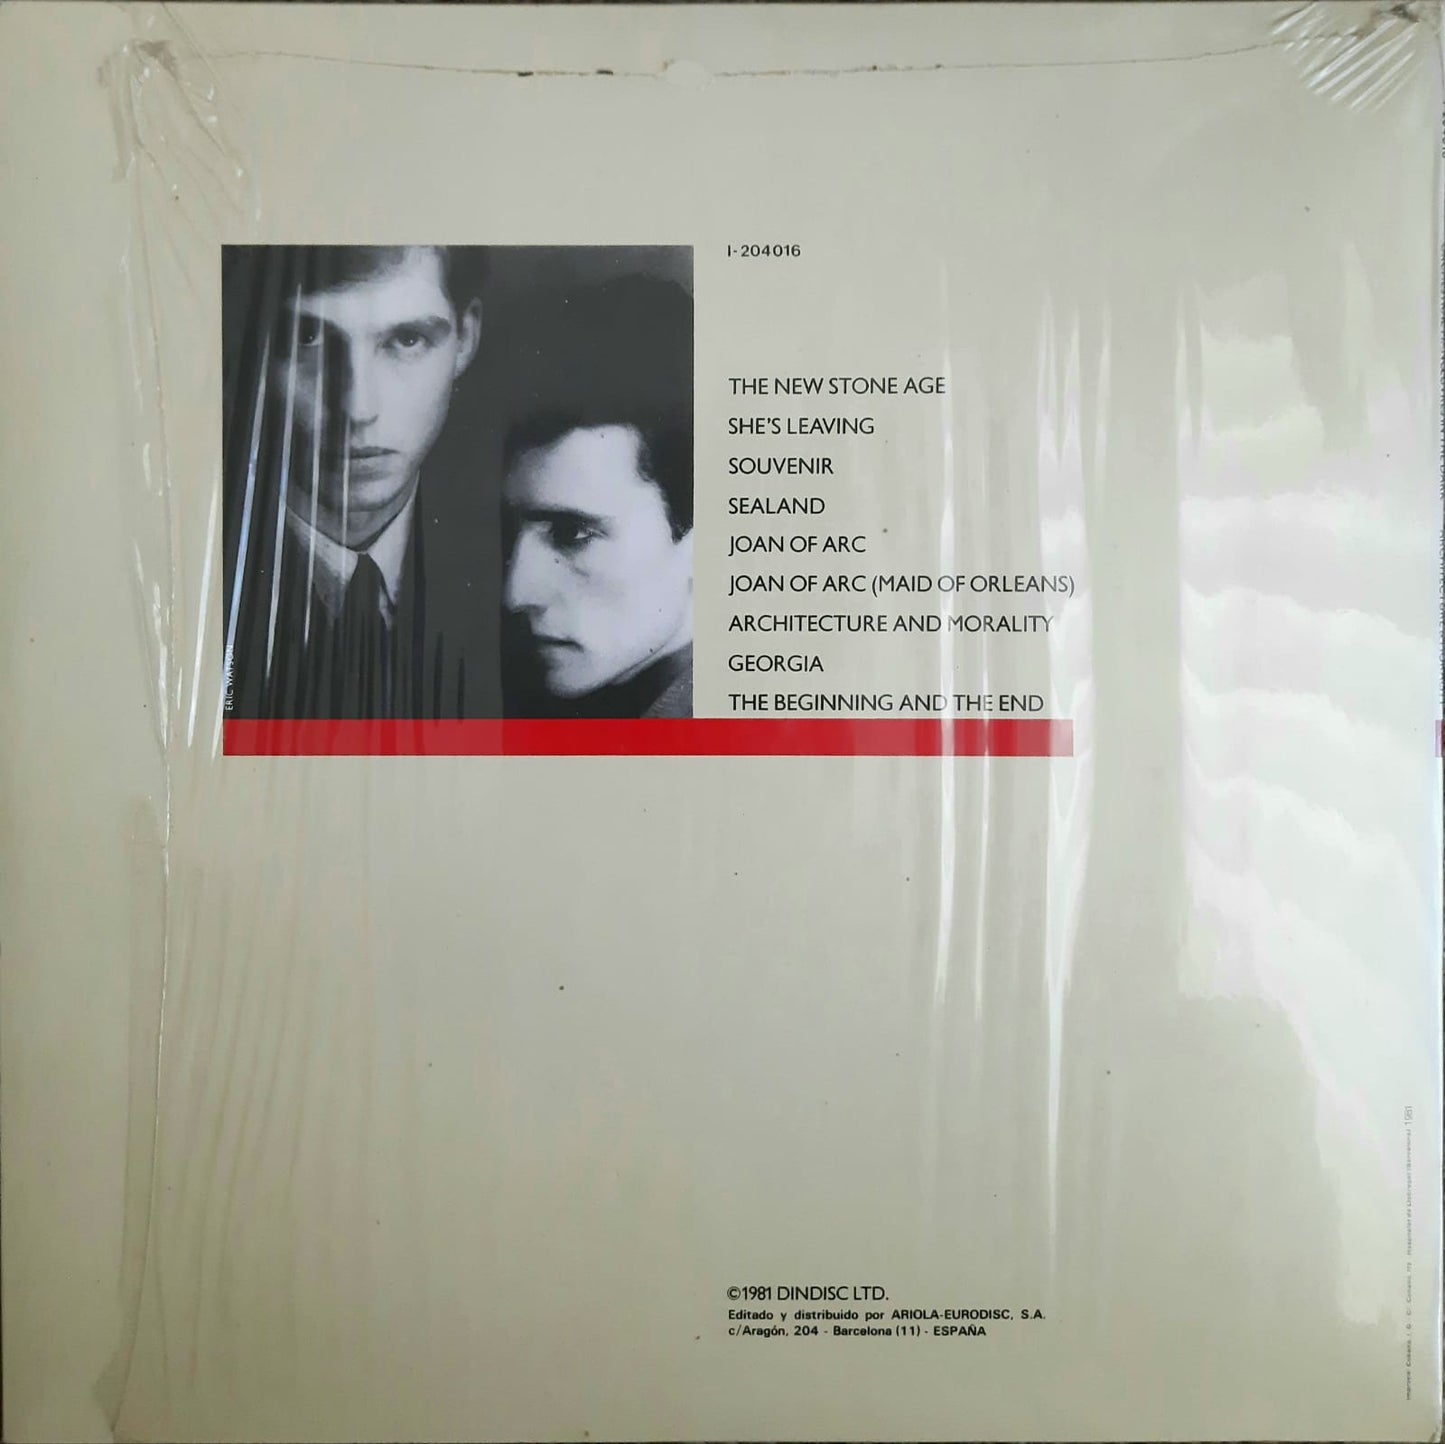 Orchestral Manœuvres In The Dark - Architecture & Morality (LP, España, 1981)